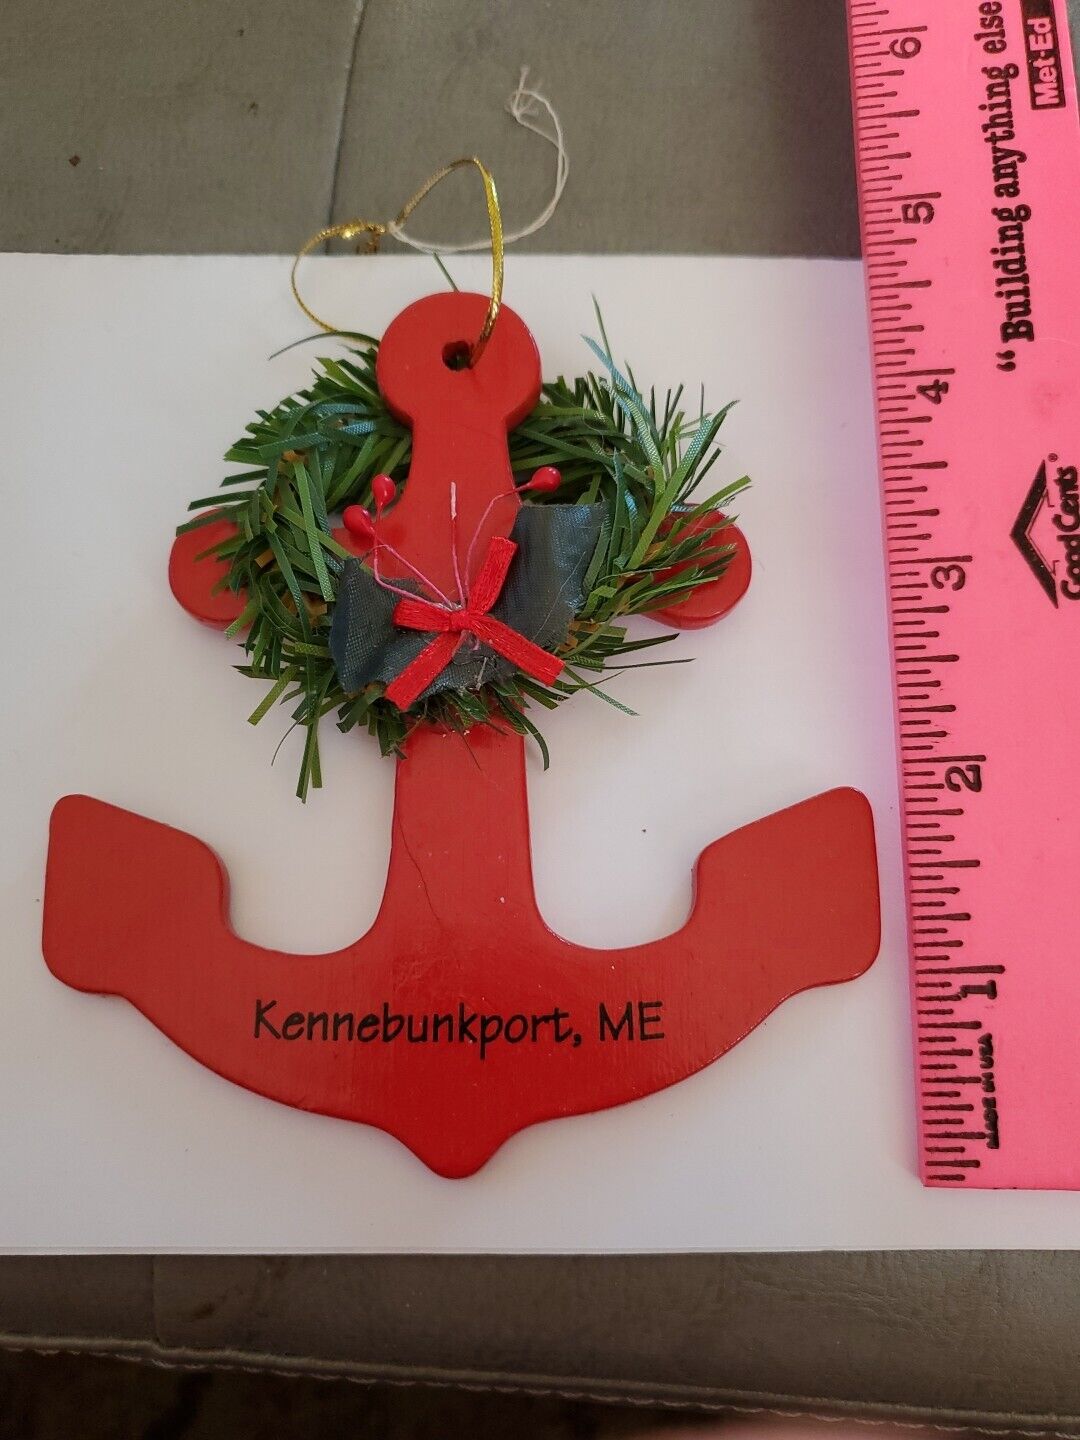  KenneBunkport Maine Christmas Tree Ornament Anchor ⚓️ Boat Ship Wood